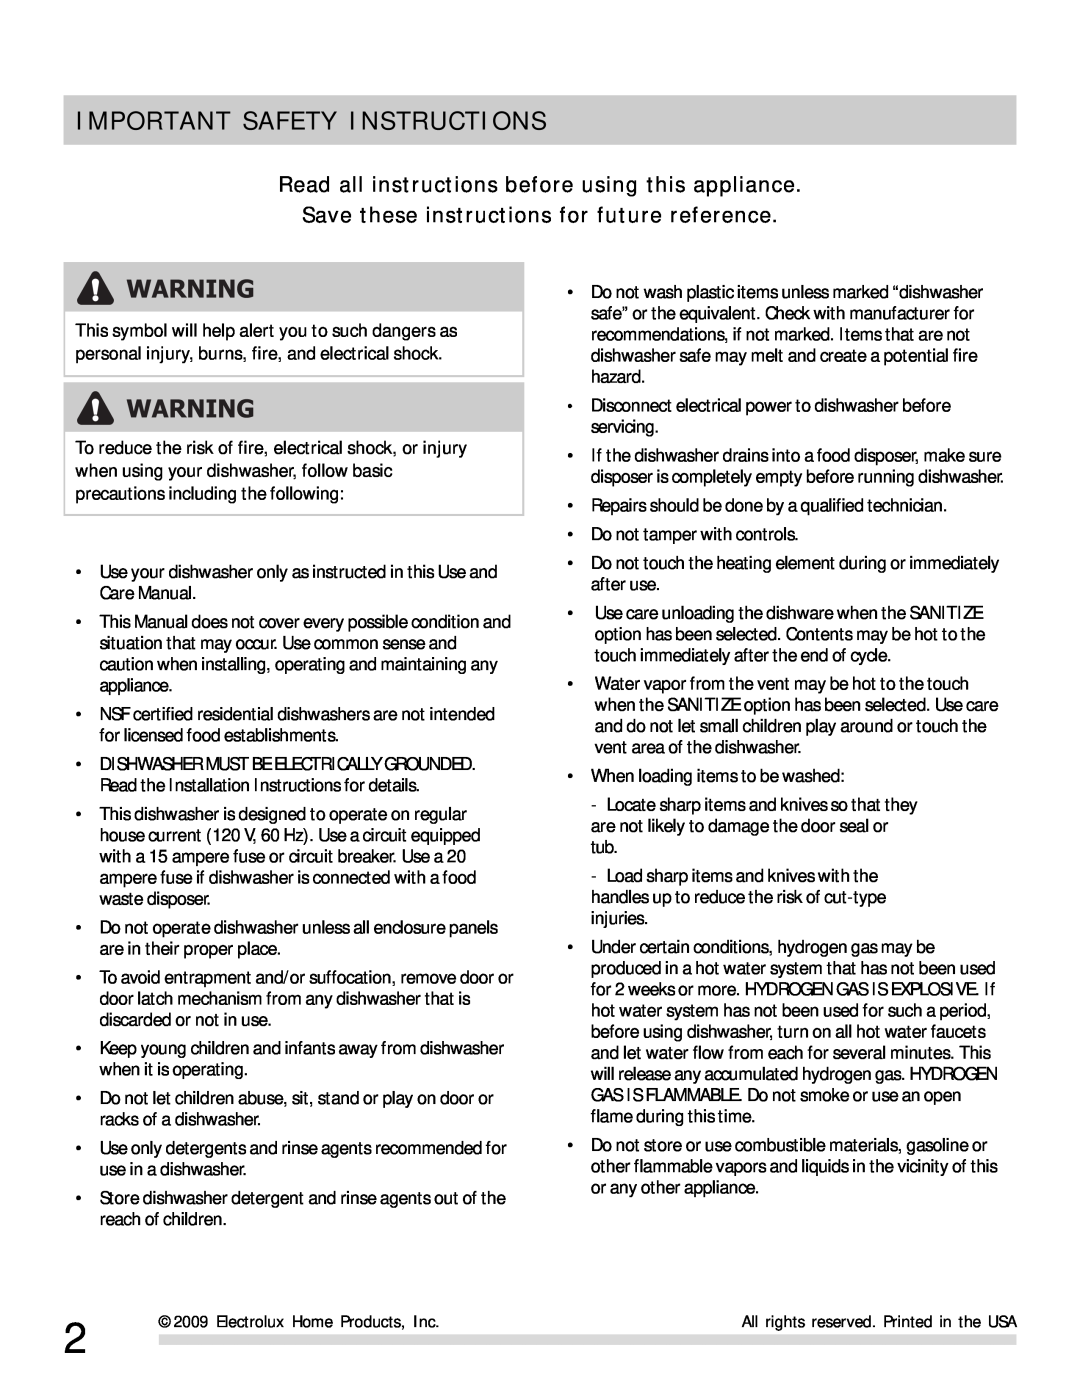 Frigidaire FPHD2491 Important Safety Instructions, Read all instructions before using this appliance 